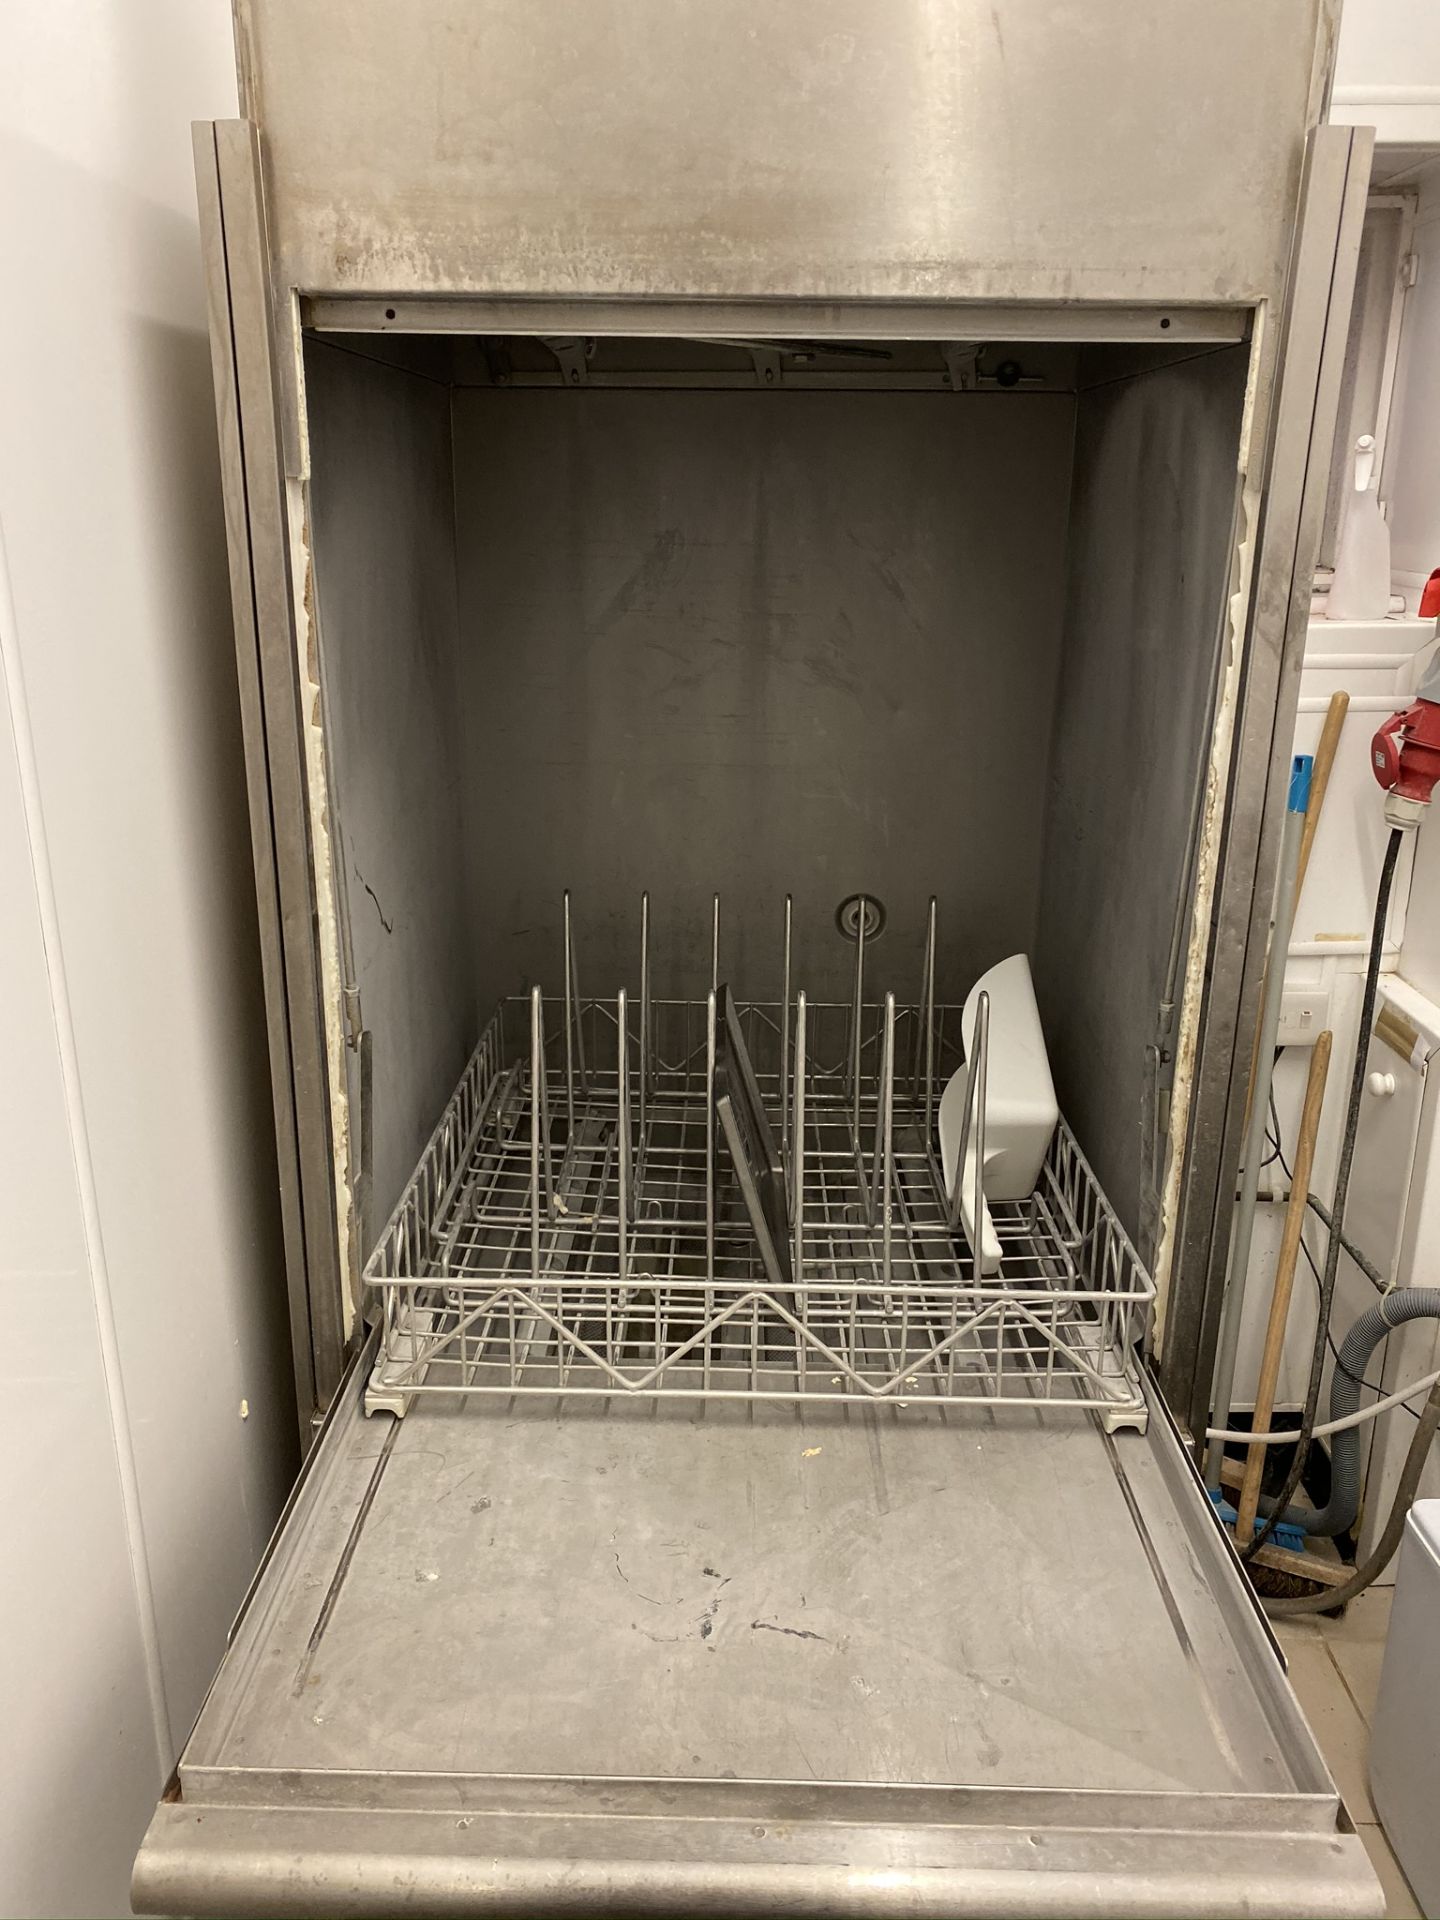 Winterhalter GS650 tray type dishwasher, Serial No: (not accessible - 2016) - Image 2 of 4